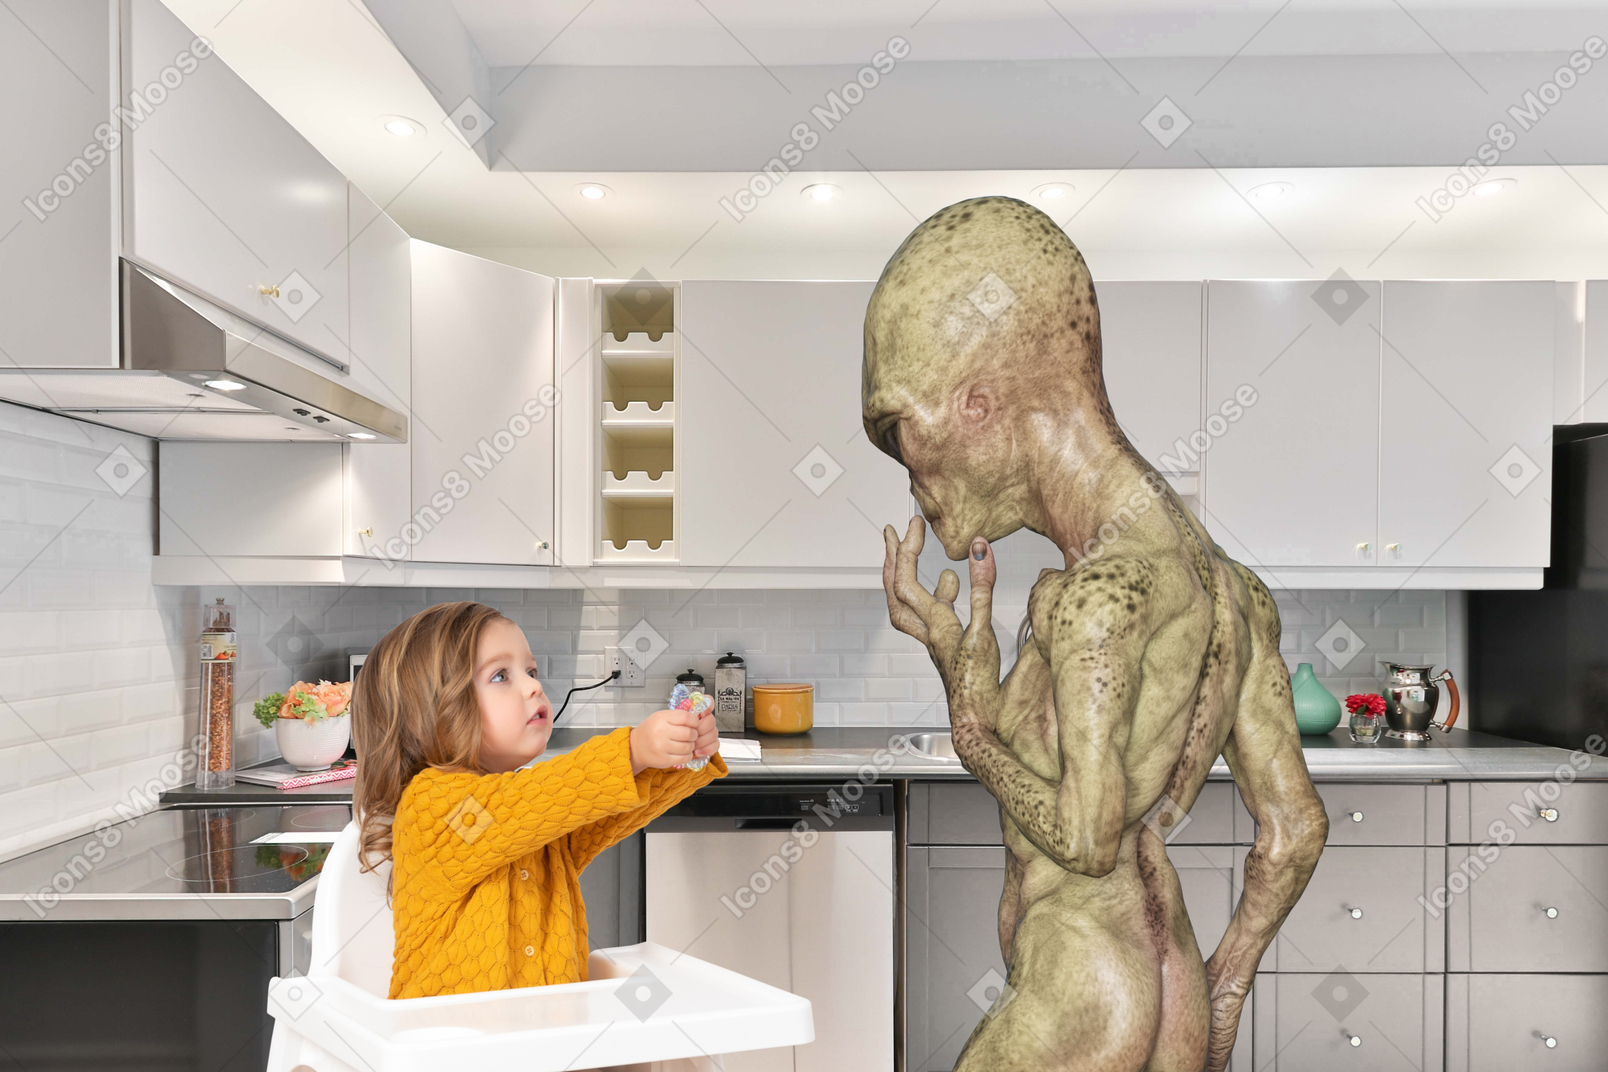 Baby asking an alien to feed her